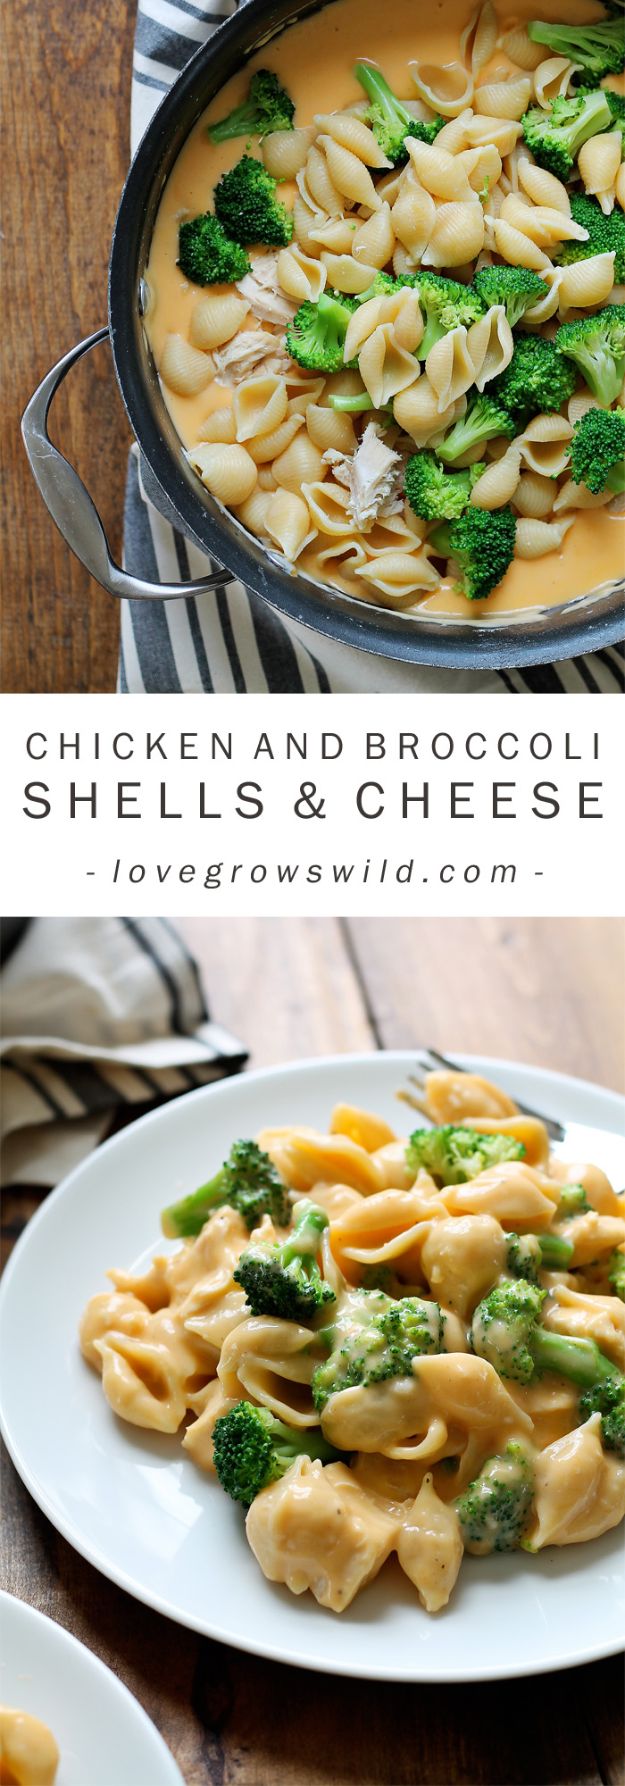 Easy Recipes For Rotisserie Chicken - Chicken And Broccoli Shells And Cheese - Healthy Recipe Ideas for Leftovers - Comfort Foods With Chicken - Low Carb and Gluten Free, Crock Pot Meals,#easyrecipes #dinnerideas #recipes